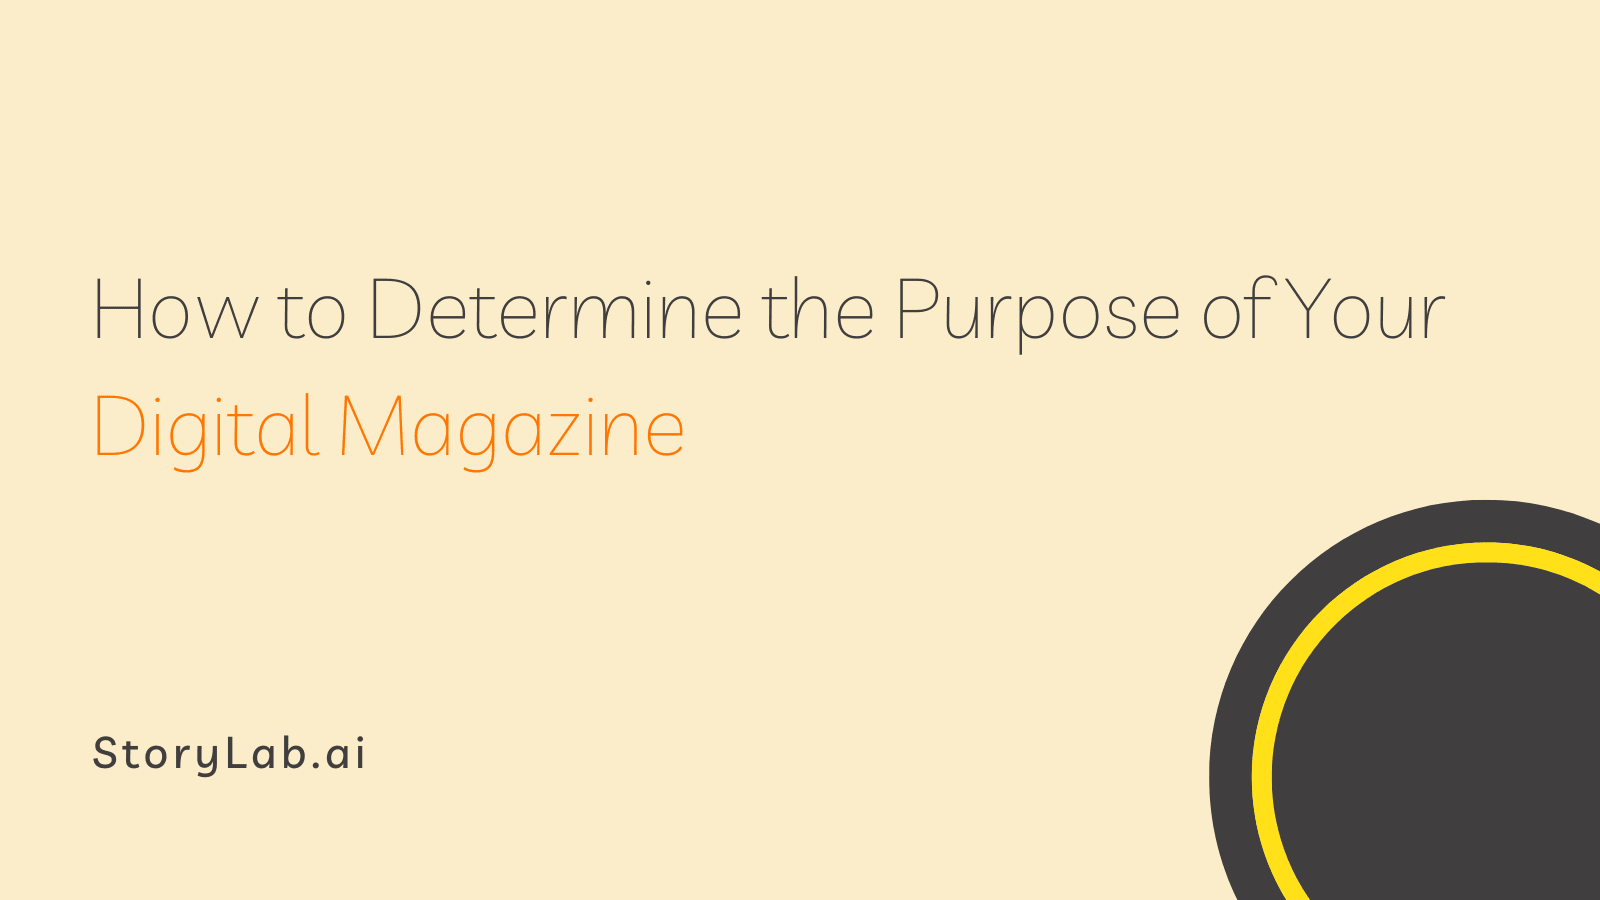 How to Determine the Purpose of Your Digital Magazine